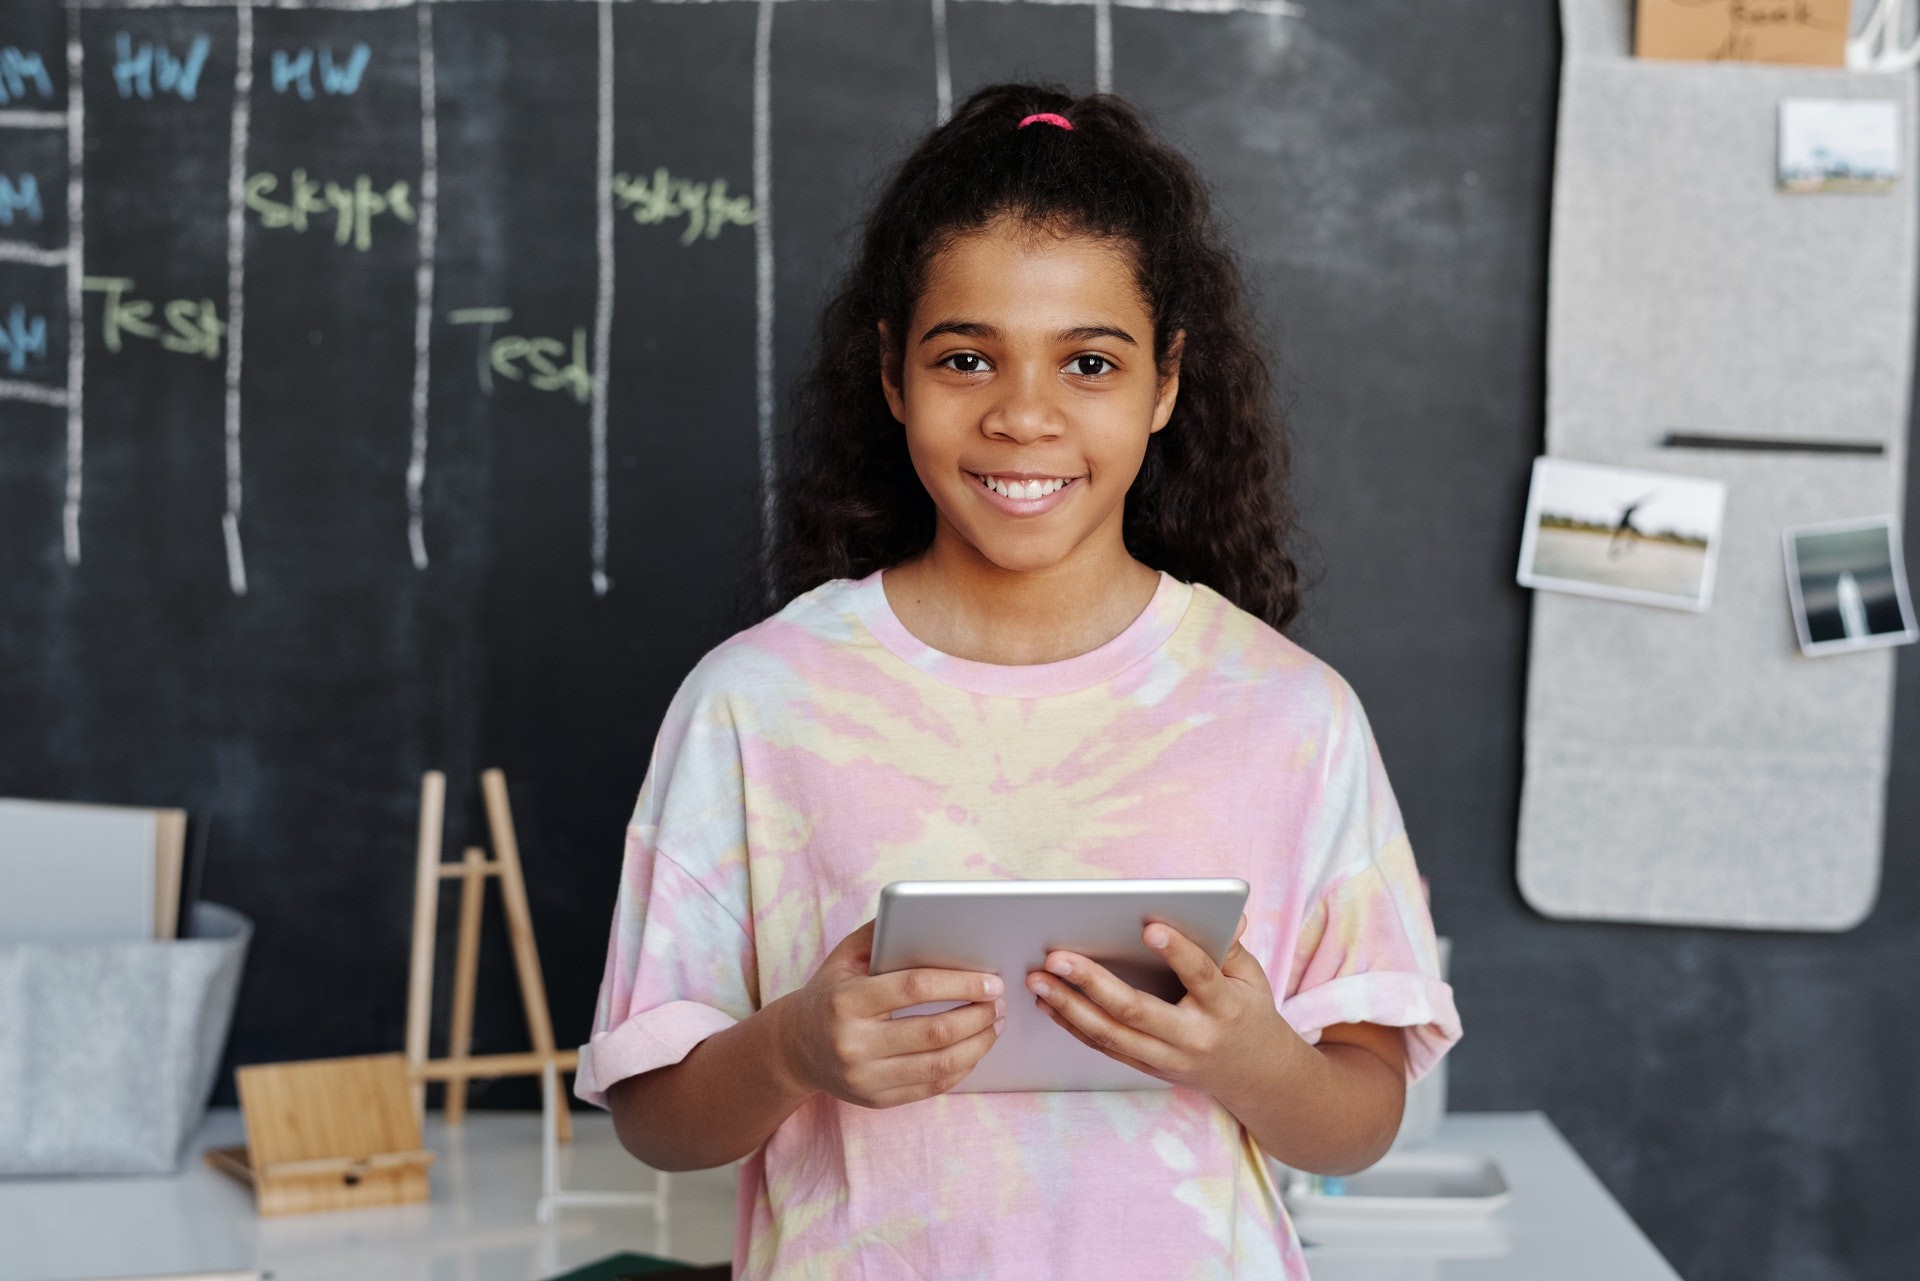 A young girl stands in front of a blackboard holding a tablet.